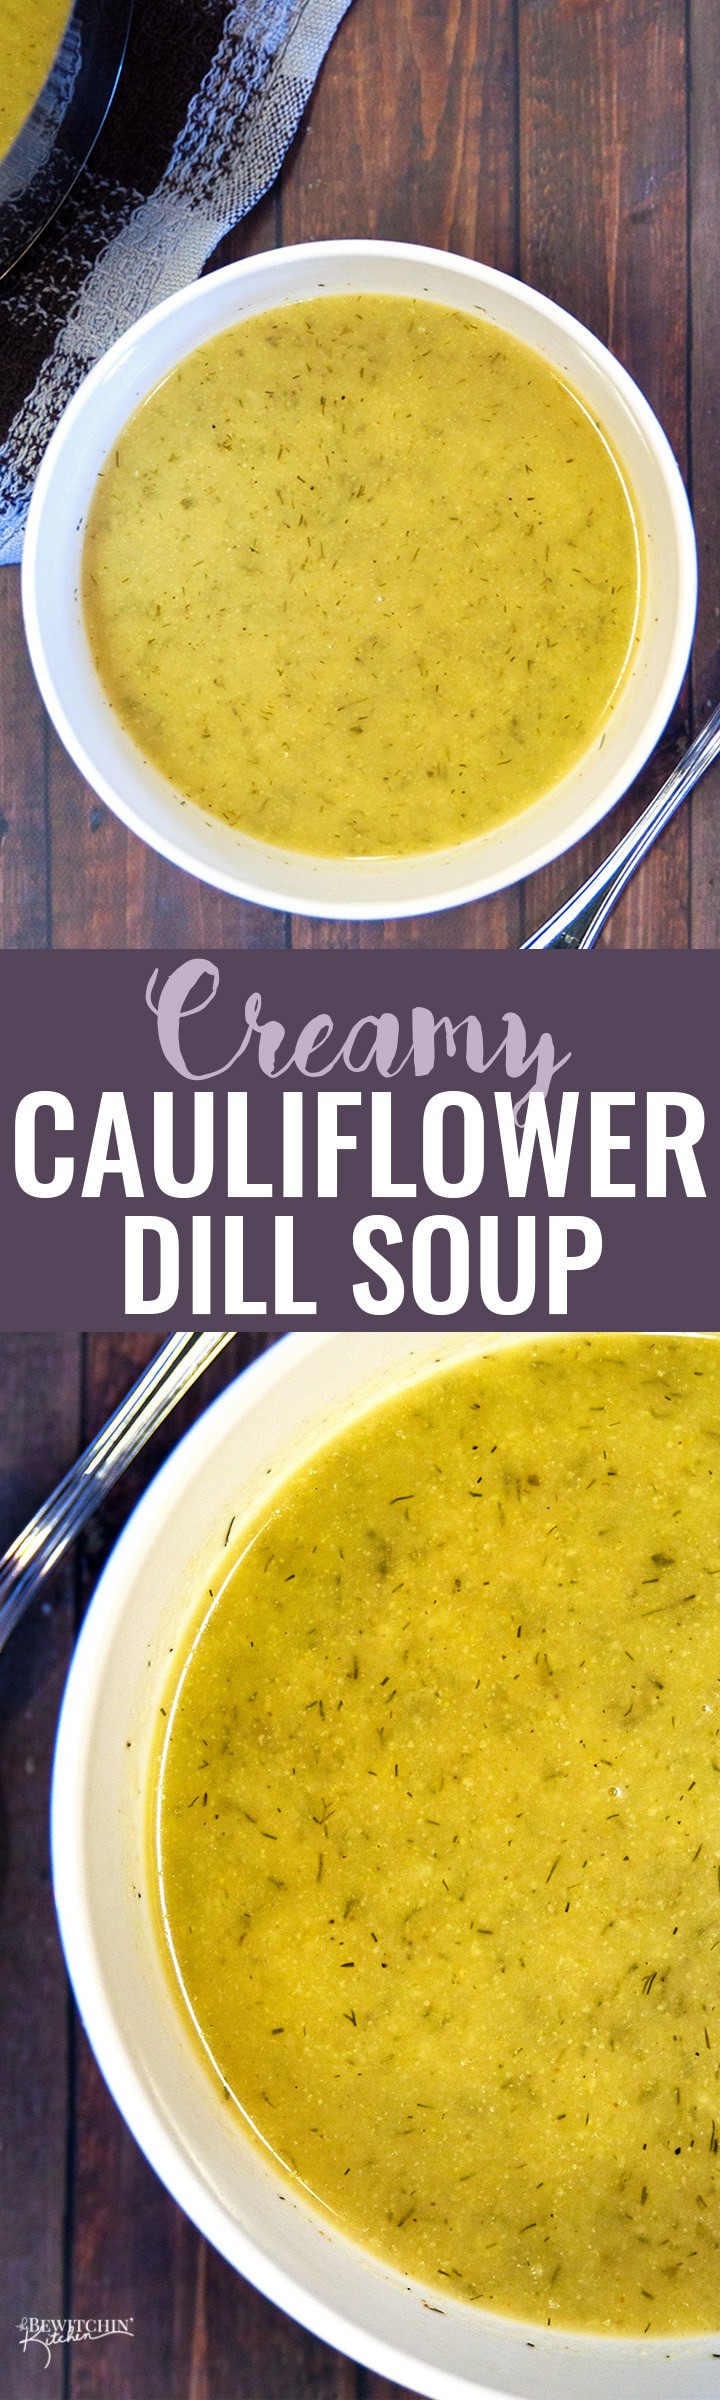 Creamy Cauliflower Dill Soup - This delicious soup recipe is dairy free, paleo, gluten free and is an easy and healthy weeknight dinner. 